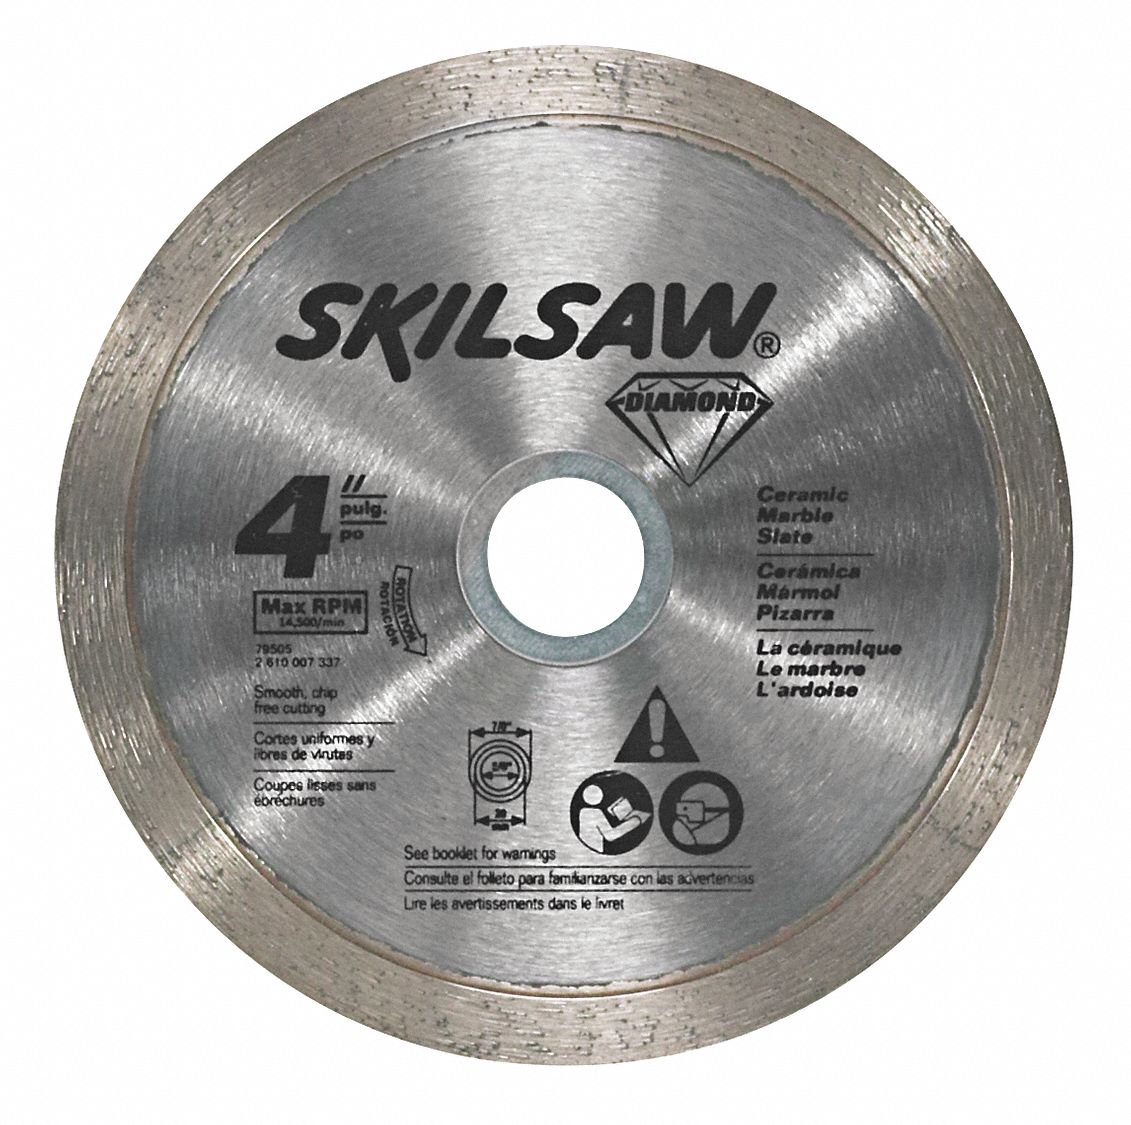 Diamond Saw Blade: 4 in Blade Dia., 5/8 in_25/32 in_7/8 in Arbor Size, Wet, Good, Continuous